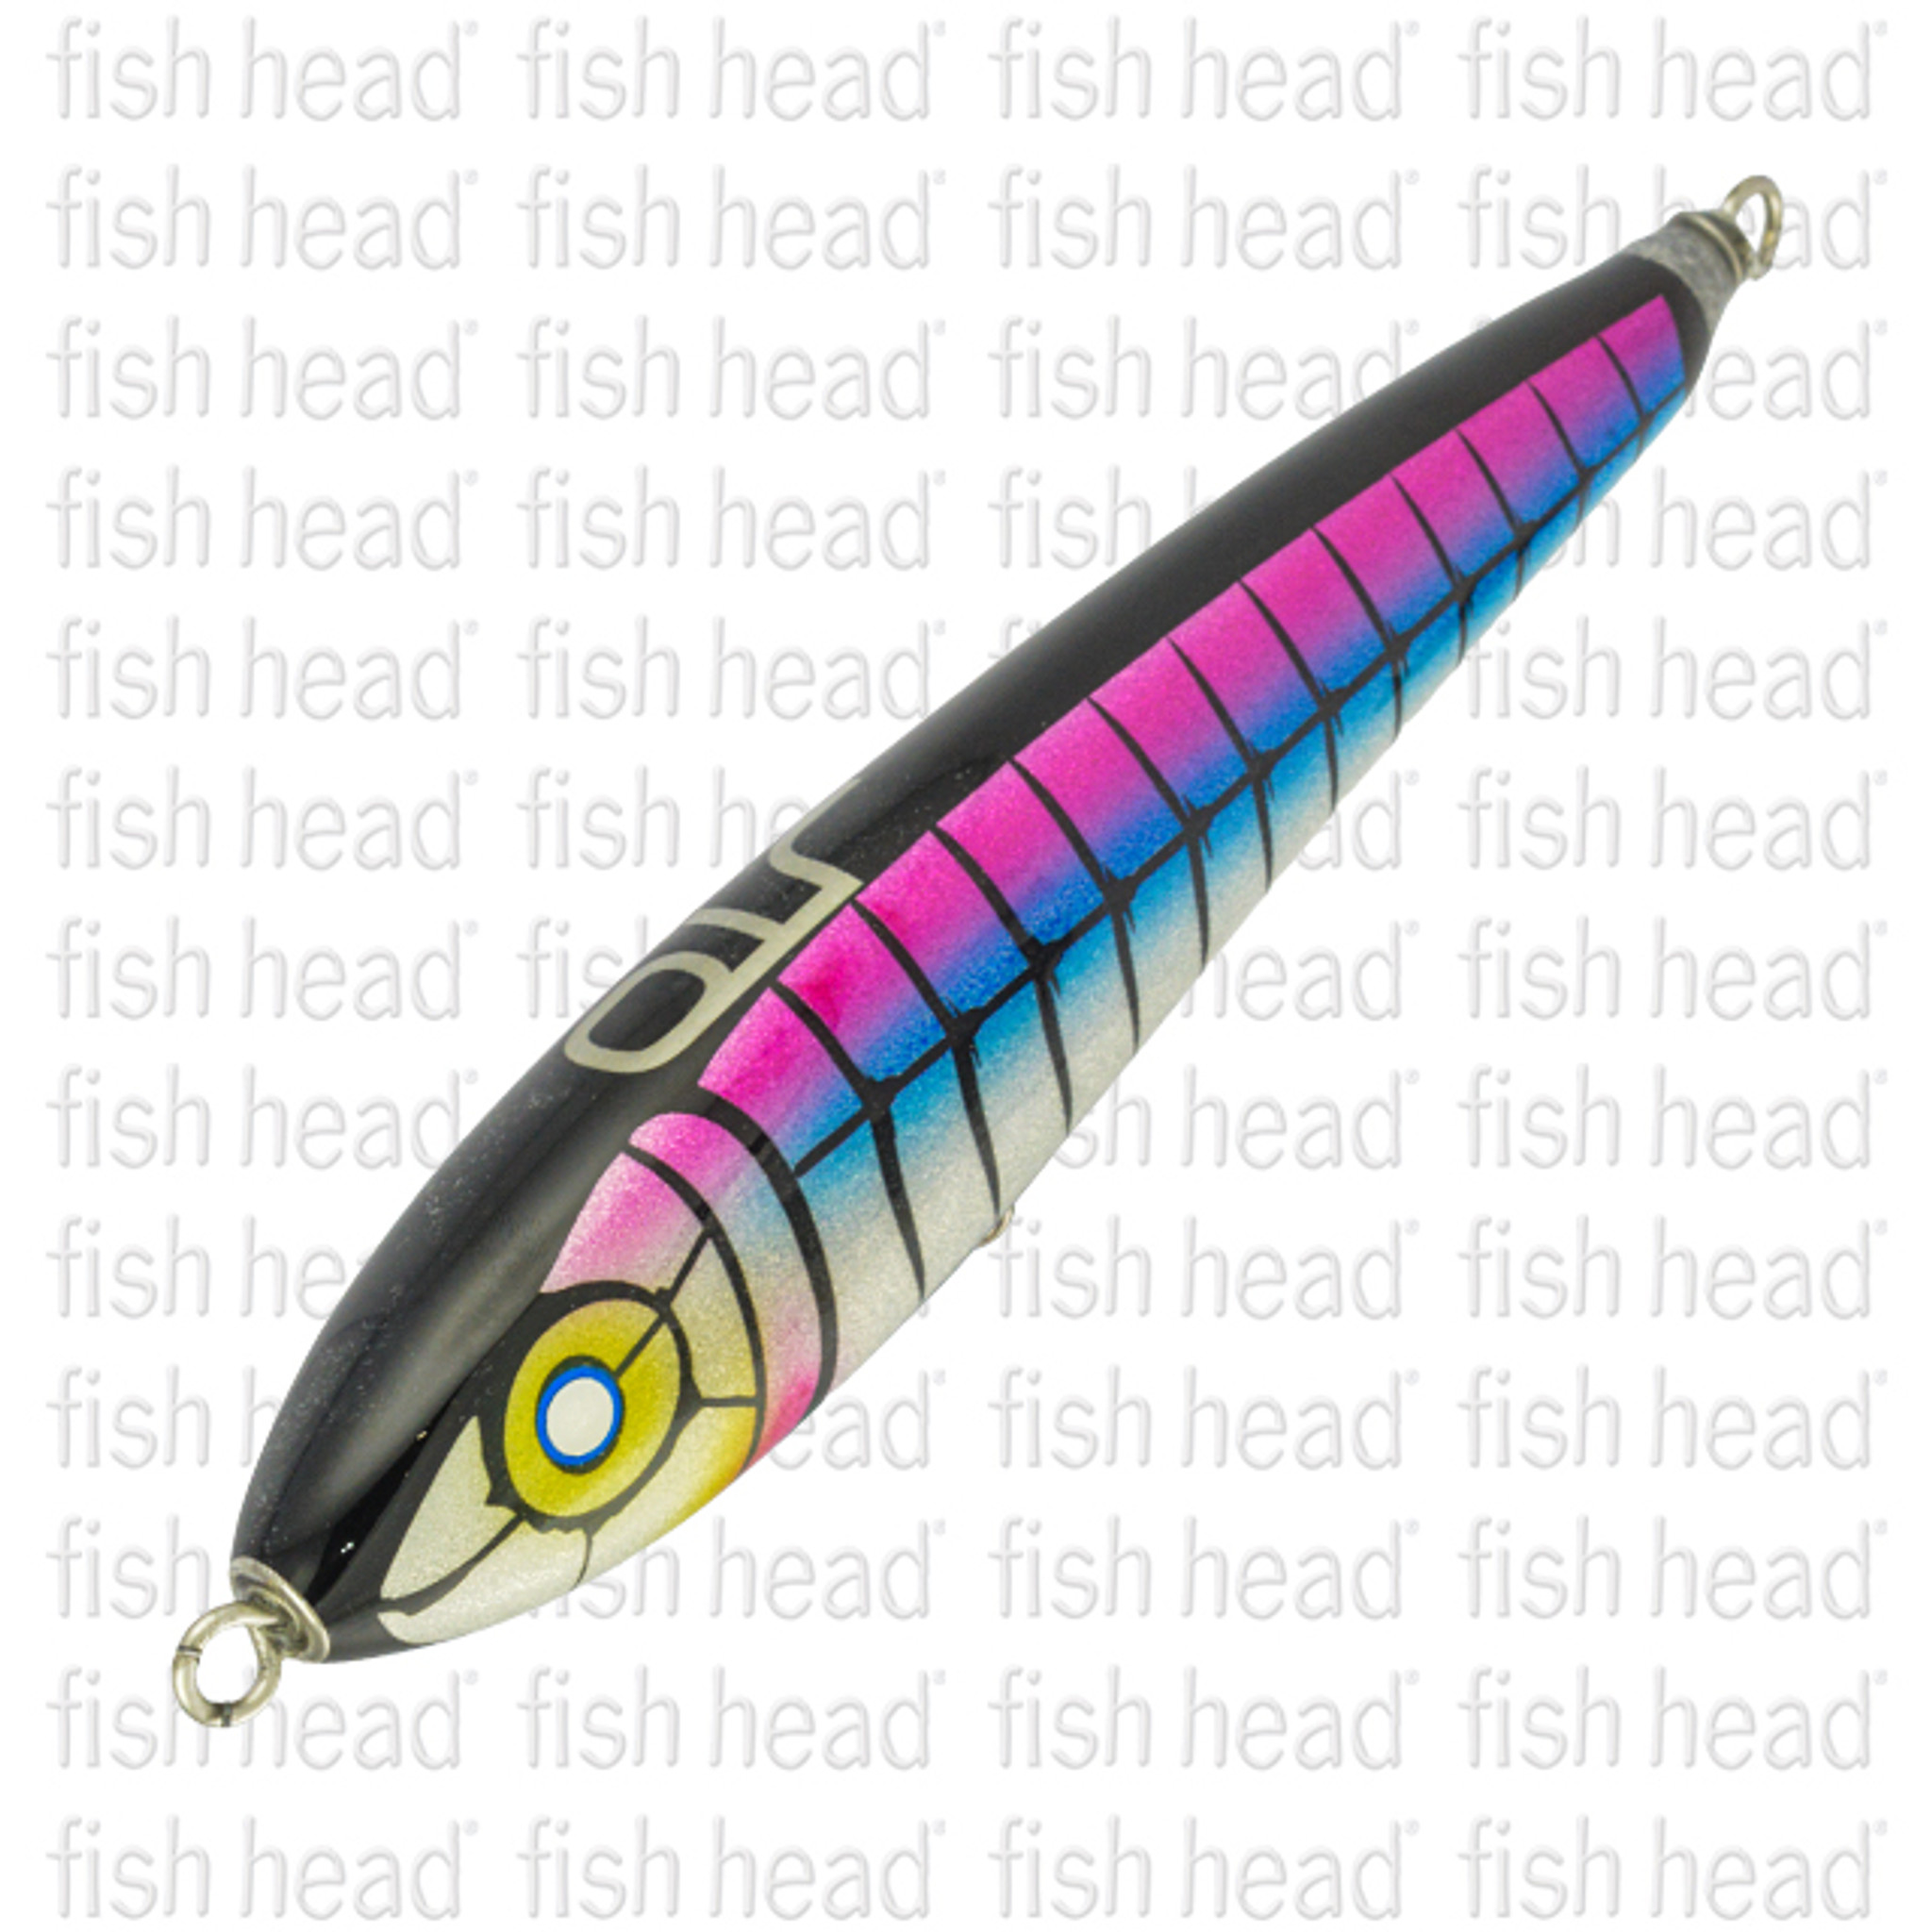 On Top Lures 100g Chop Floating Stickbait - Fish Head